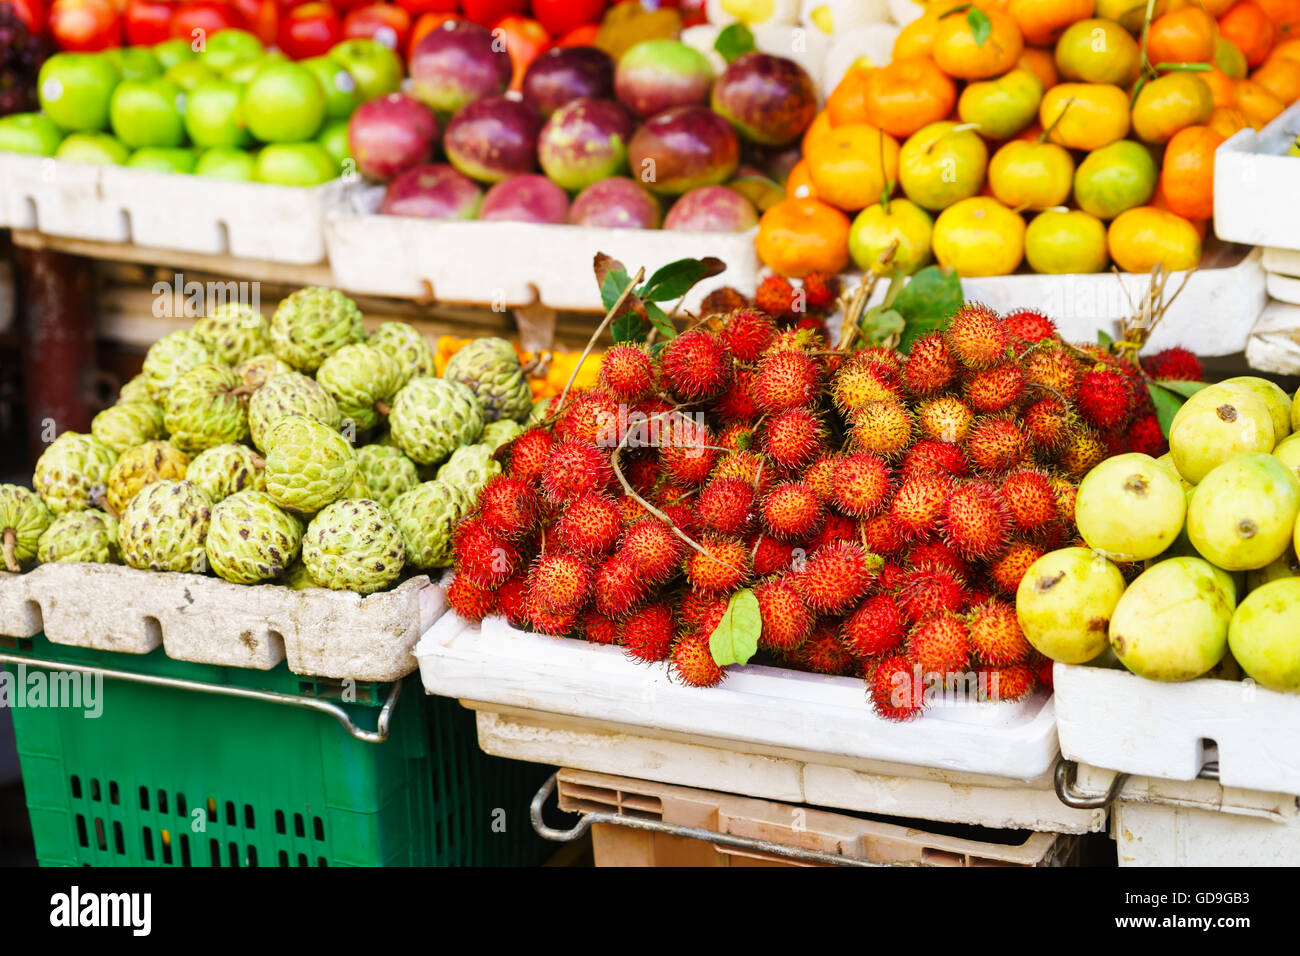 Asian street farmer market selling fresh fruit and berry in Hoi An, Vietnam. Passion fruit, litchi, cherimoya, mango and other. Red, orange and green colors. Stock Photo